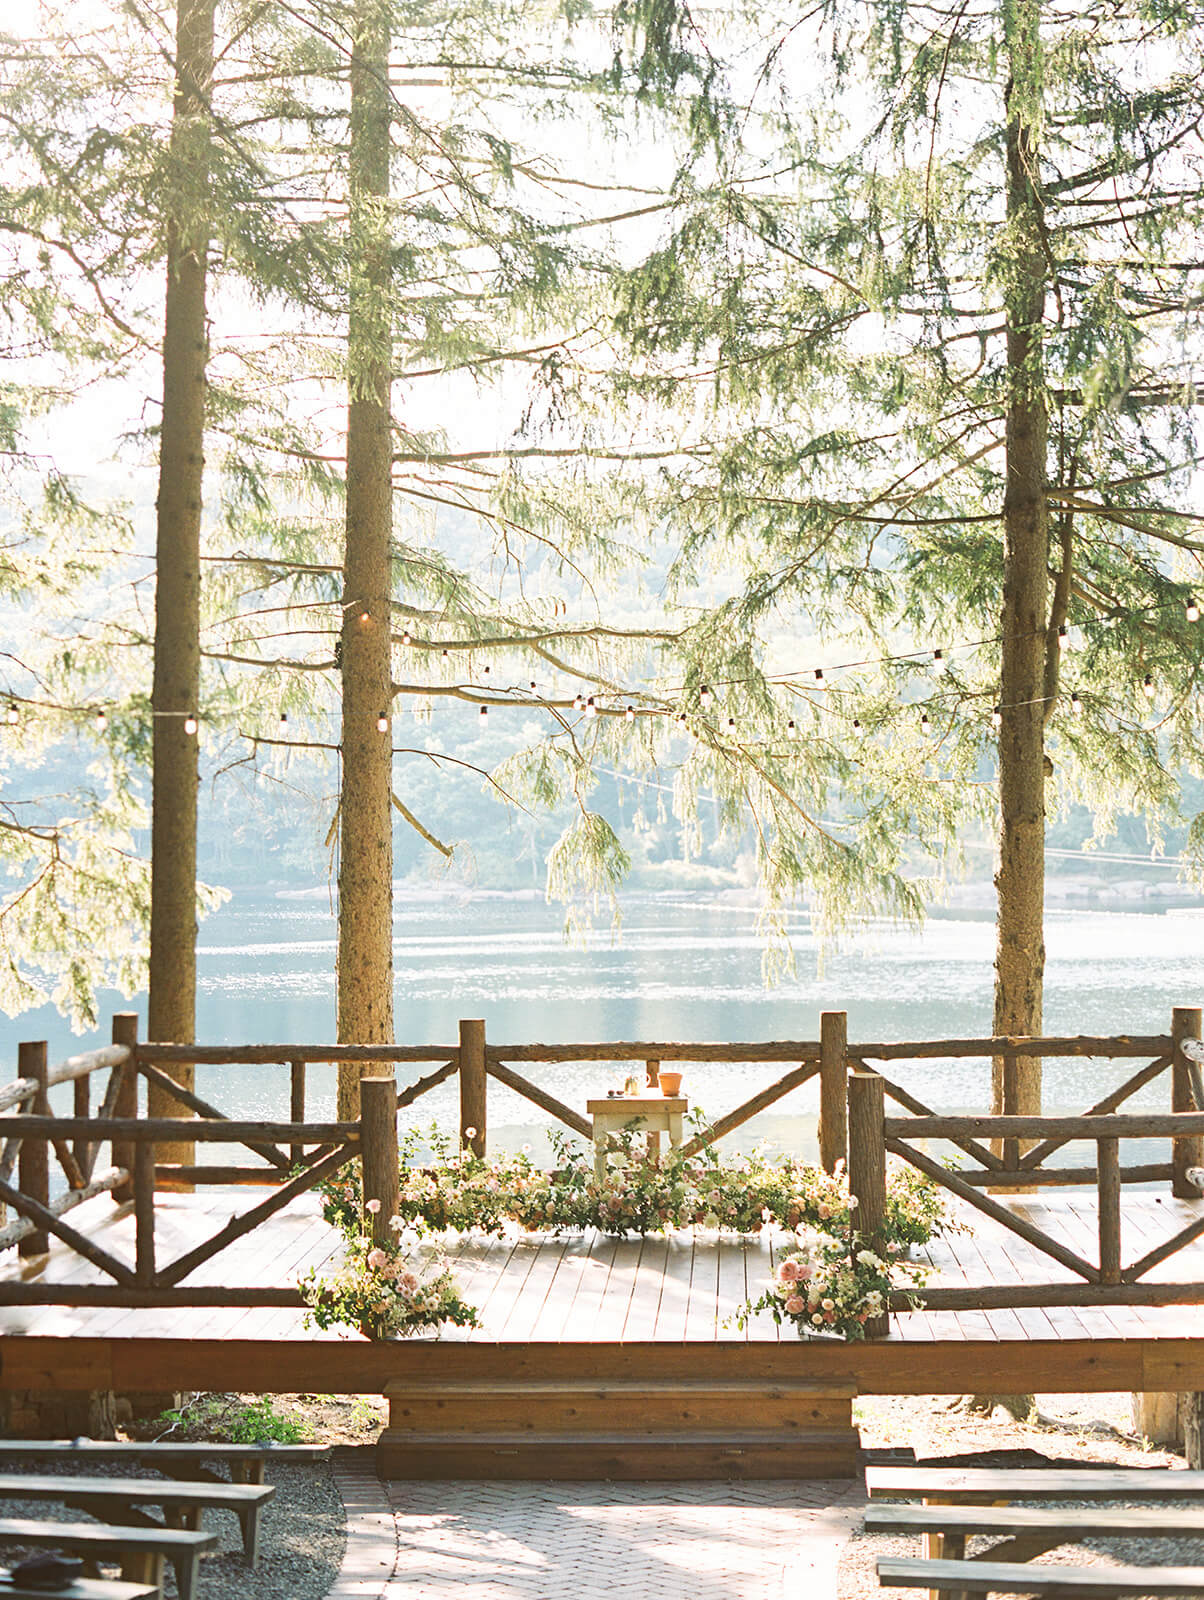 When planning your wedding, consider the feeling. This is an outdoor ceremony for a rustic and charming wedding vibe